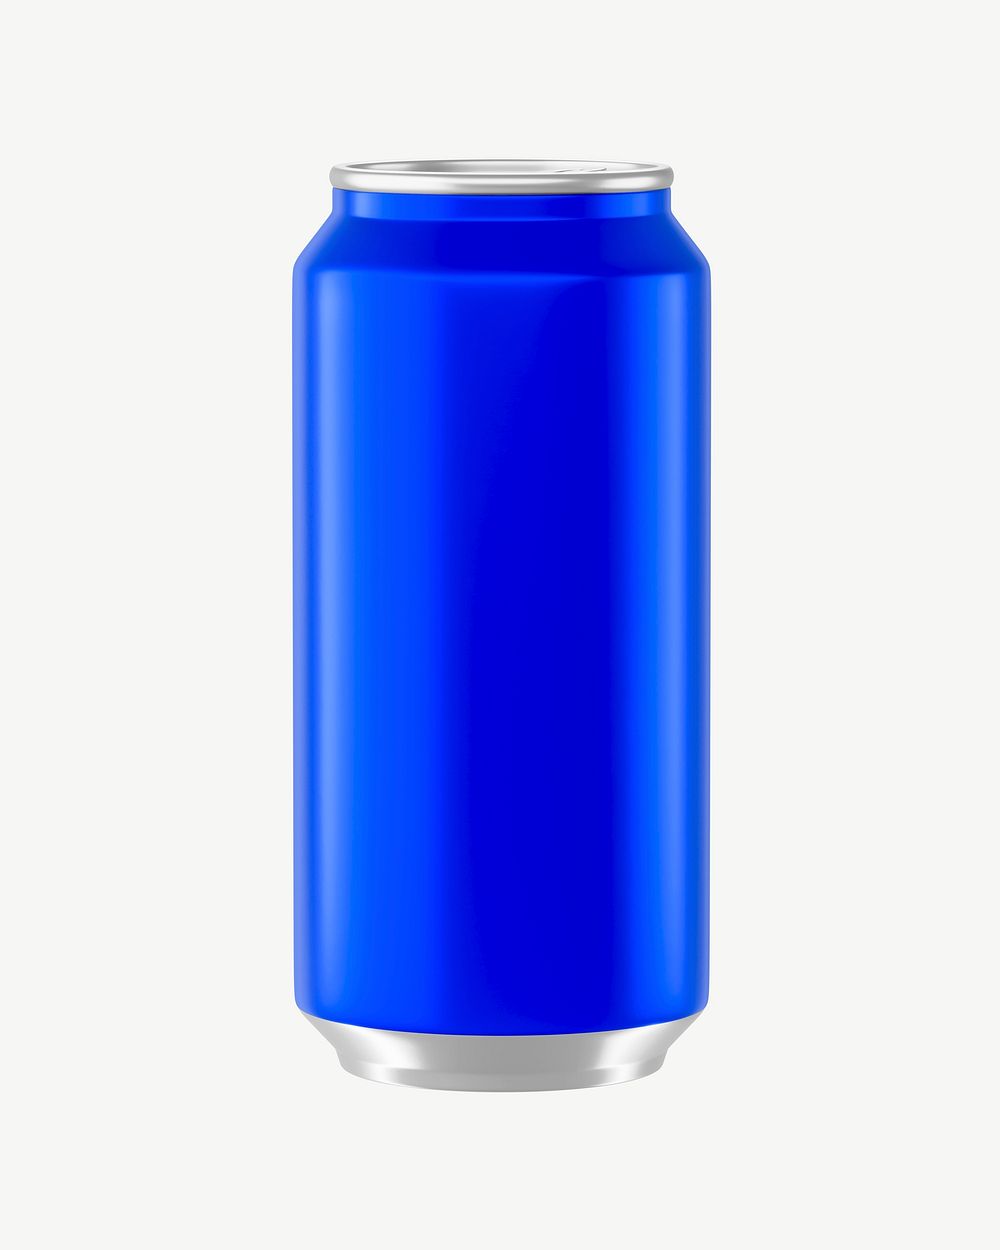 3D blue soda can, collage element psd